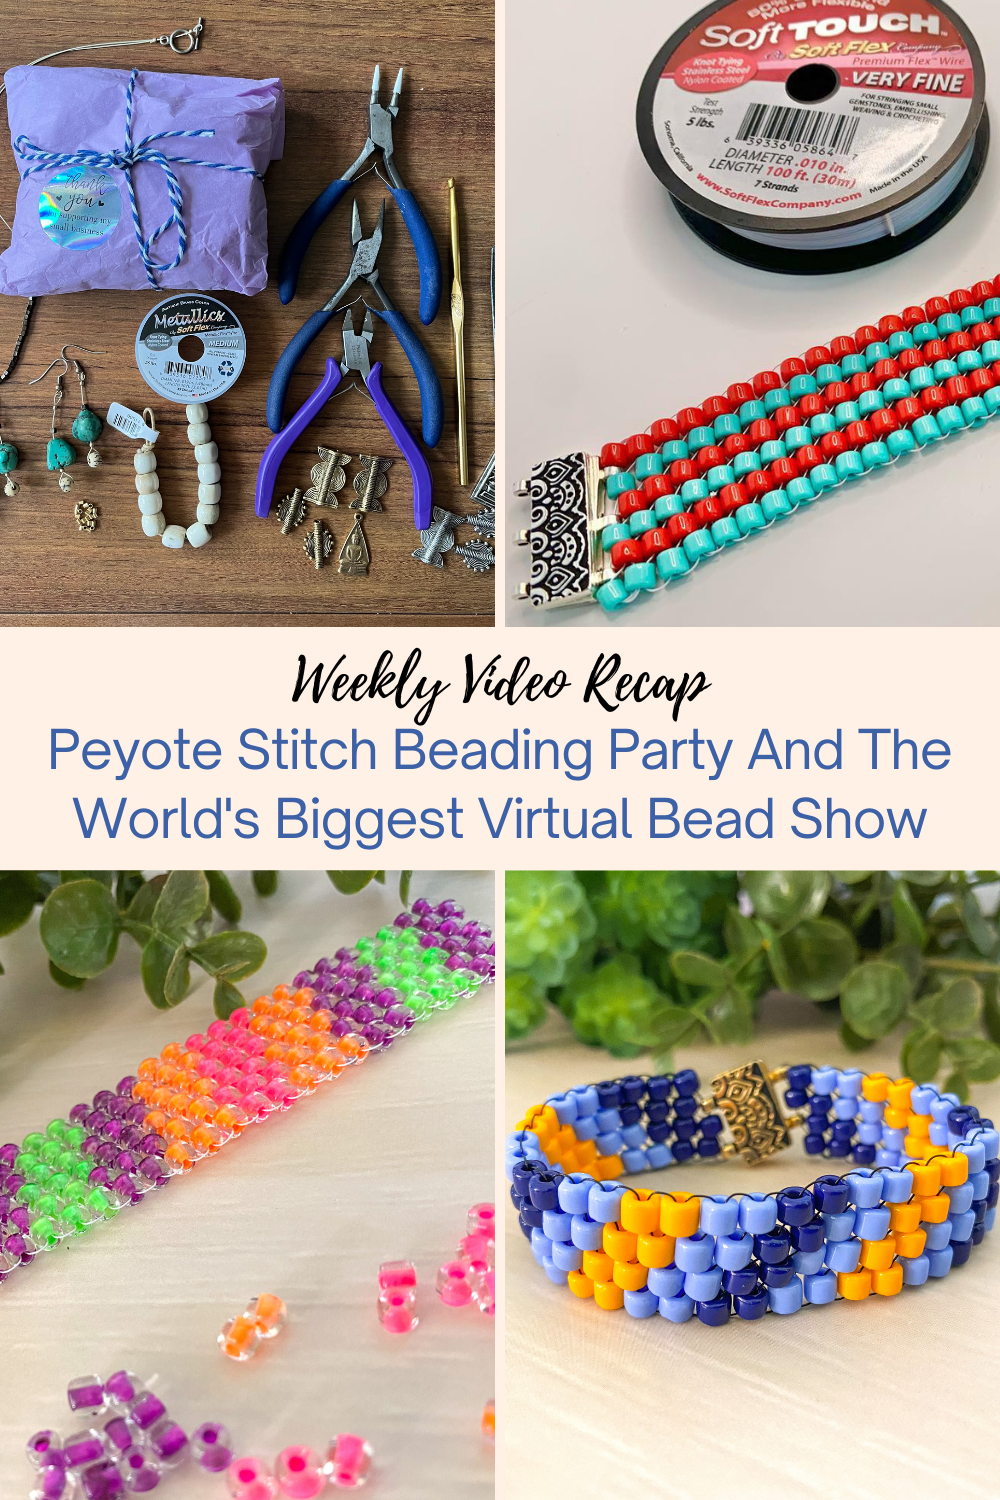 Peyote Stitch Beading Party And The World's Biggest Virtual Bead Show Collage